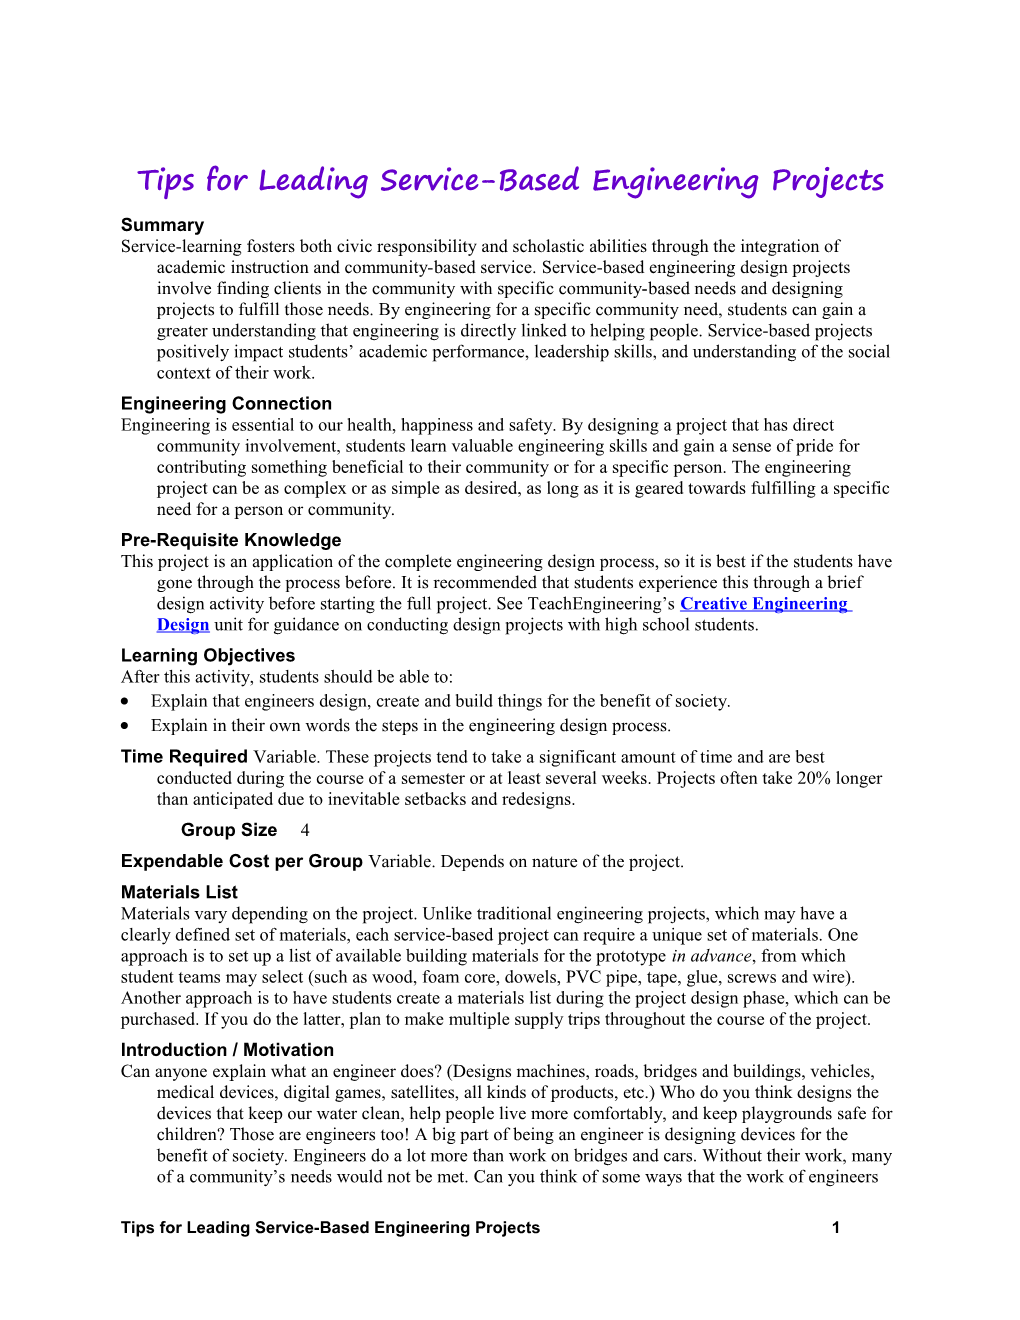 Tips for Leading Service-Based Engineering Projects